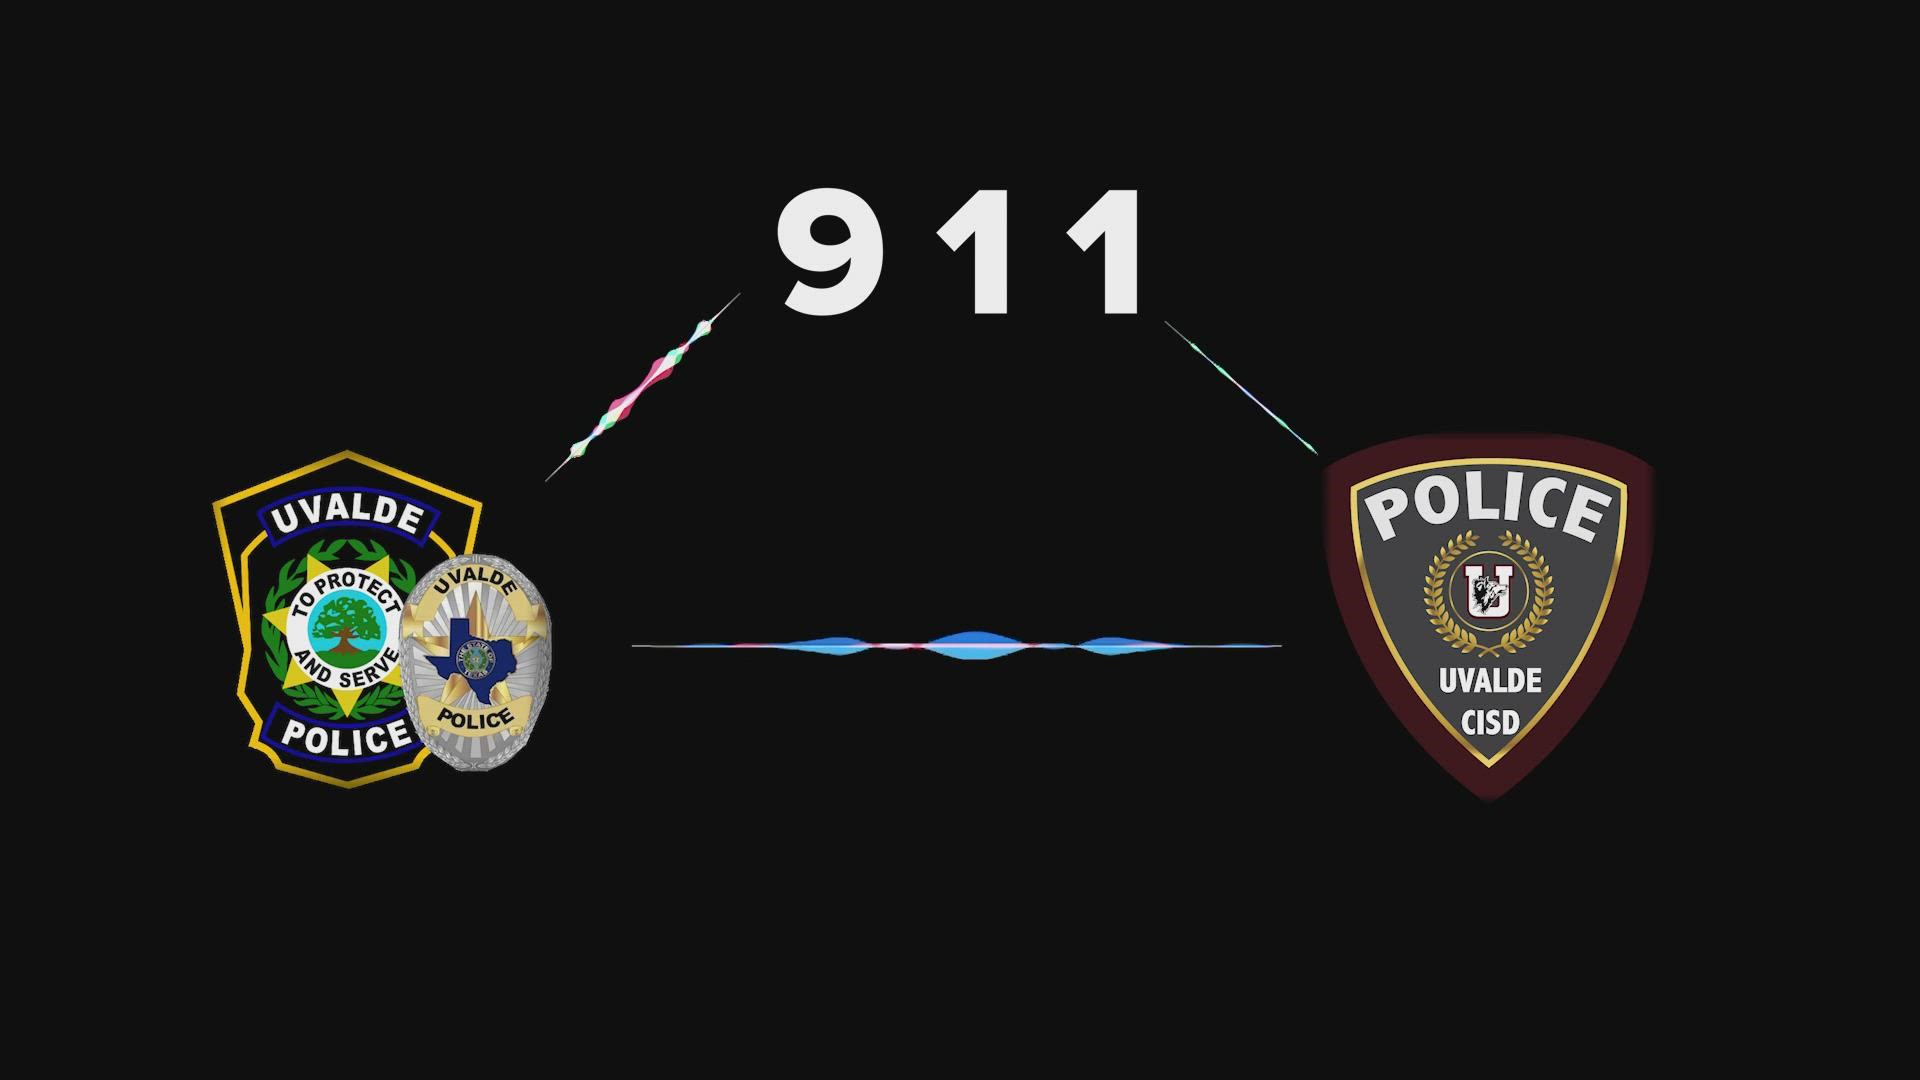 The officer in charge, Pete Arredondo did not have a direct line to 911 dispatchers